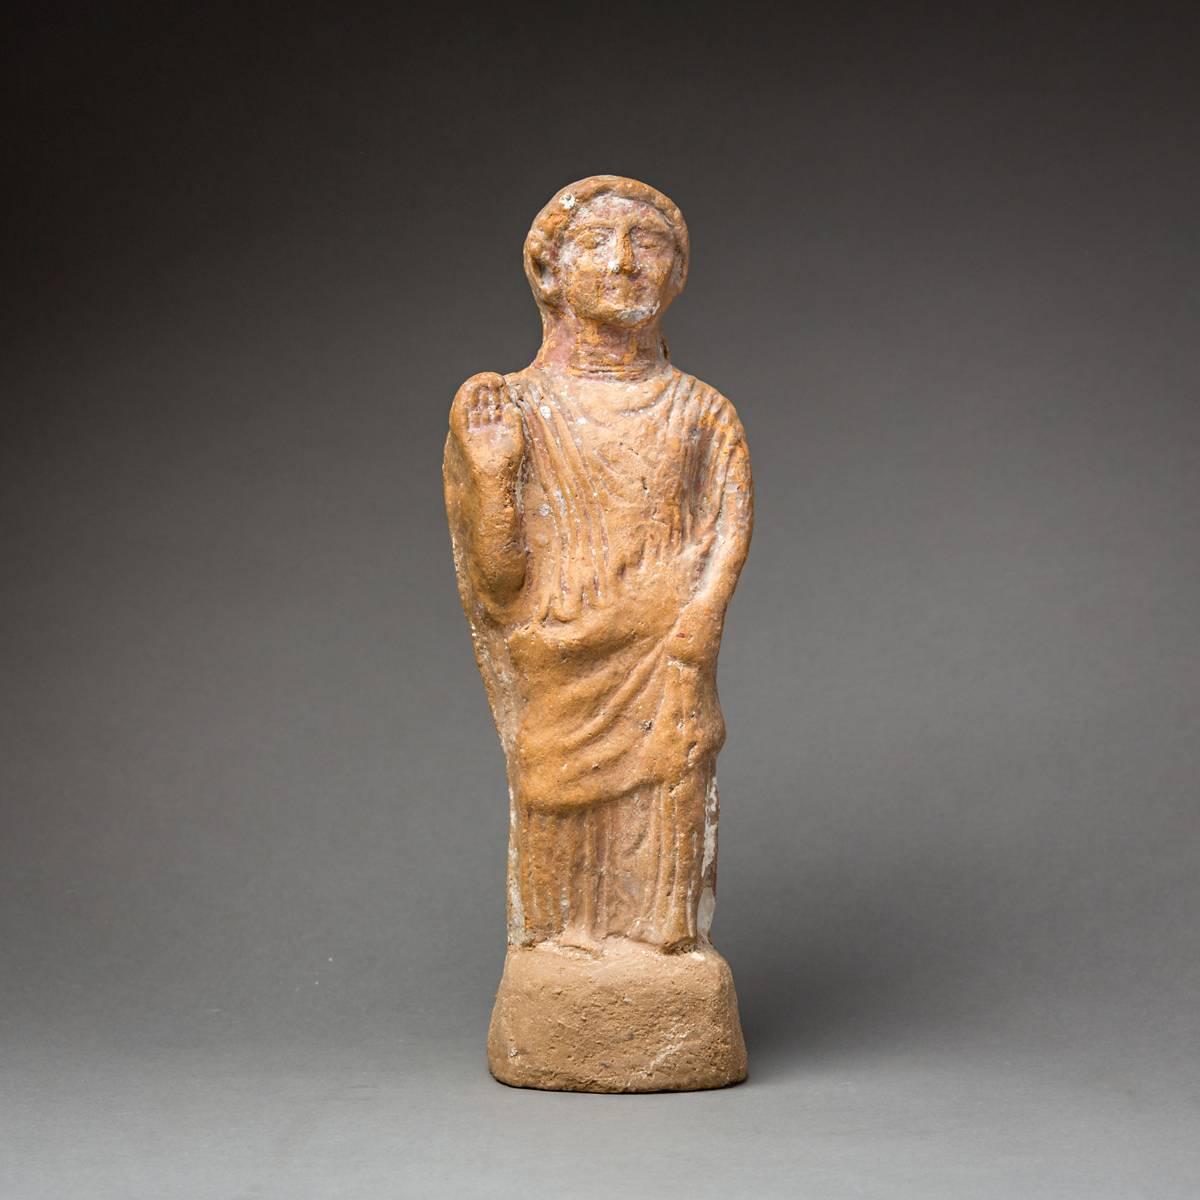 This well-composed ceramic sculpture is a votive figure from the middle of the first millennium BC, and represents a Phoenician deity. The goddess is standing on an integral base (partially restored) and is unusually well-and extensively detailed.